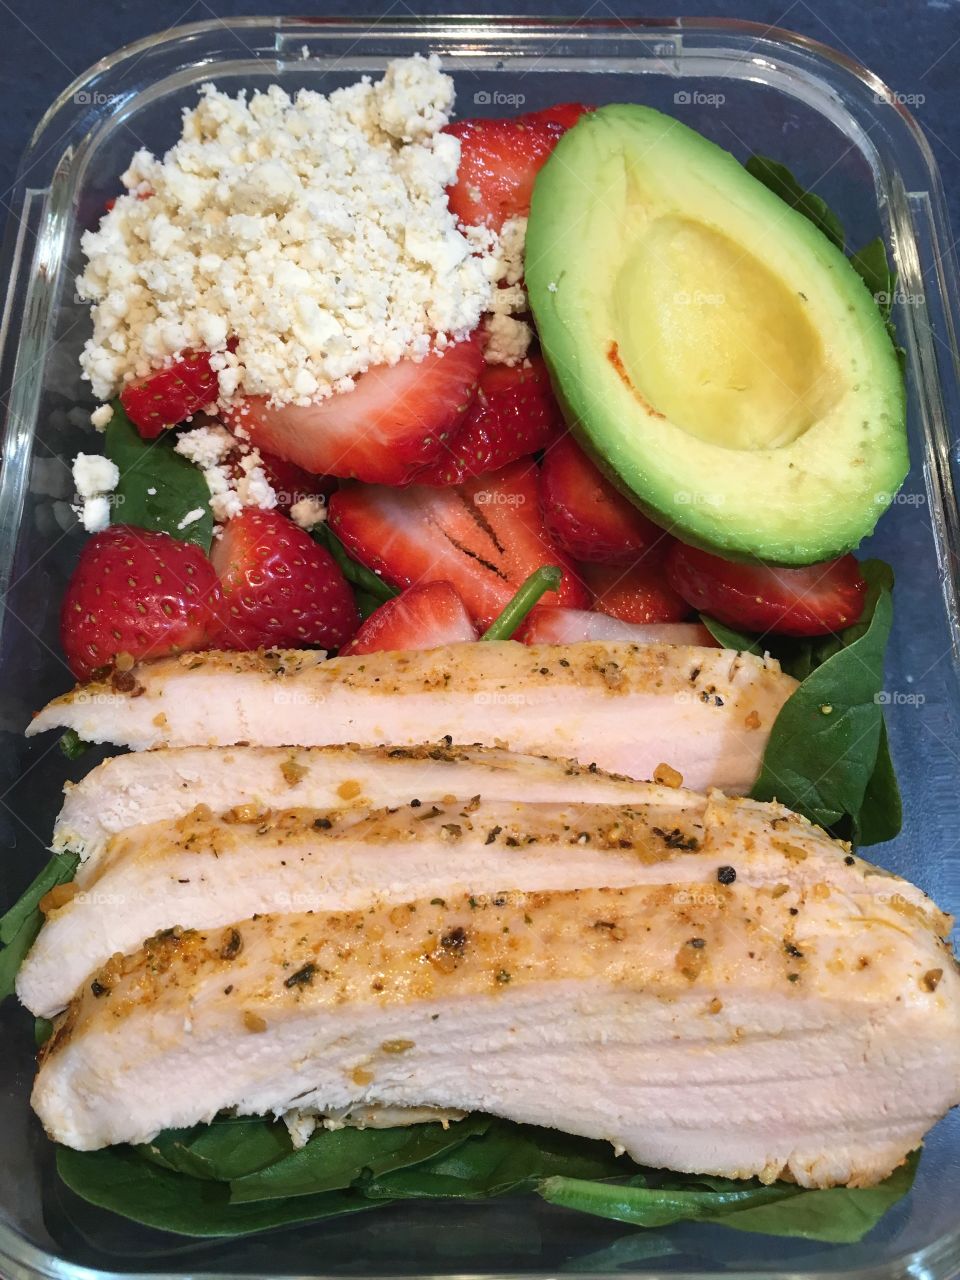 Strawberries, feta, grilled chicken and avocado spinach salad.